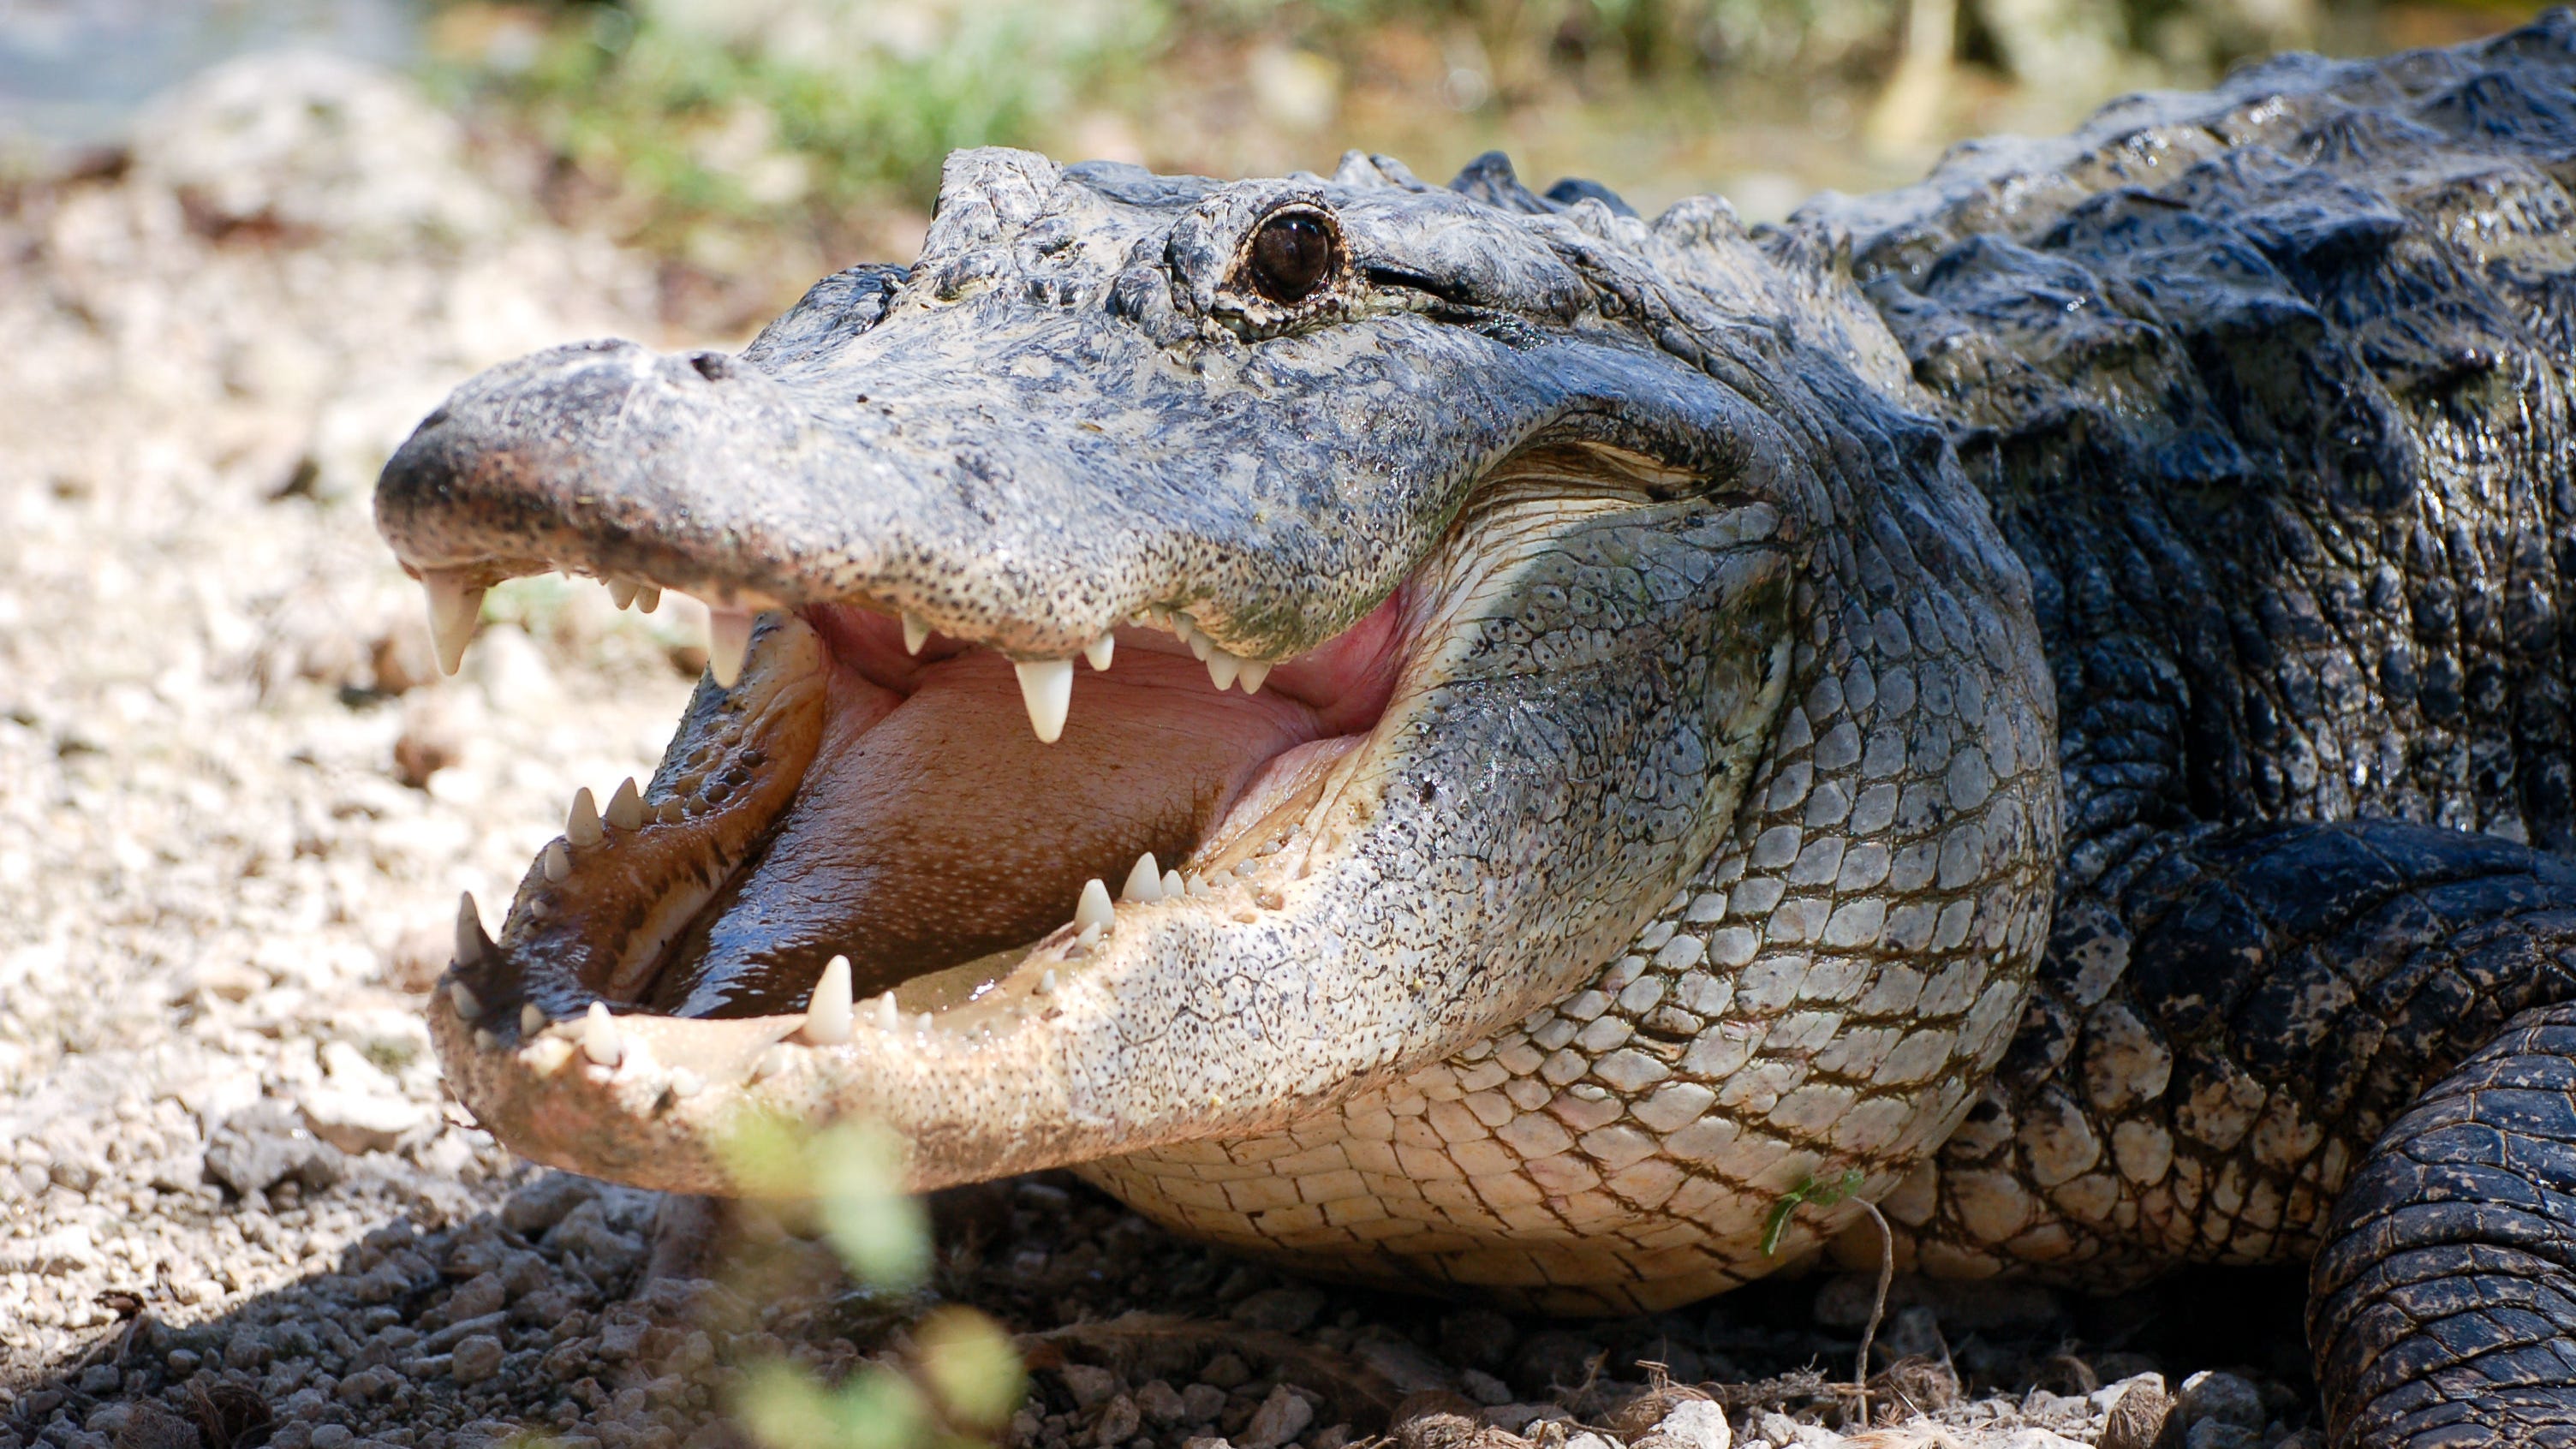 Actually, alligators are great moms